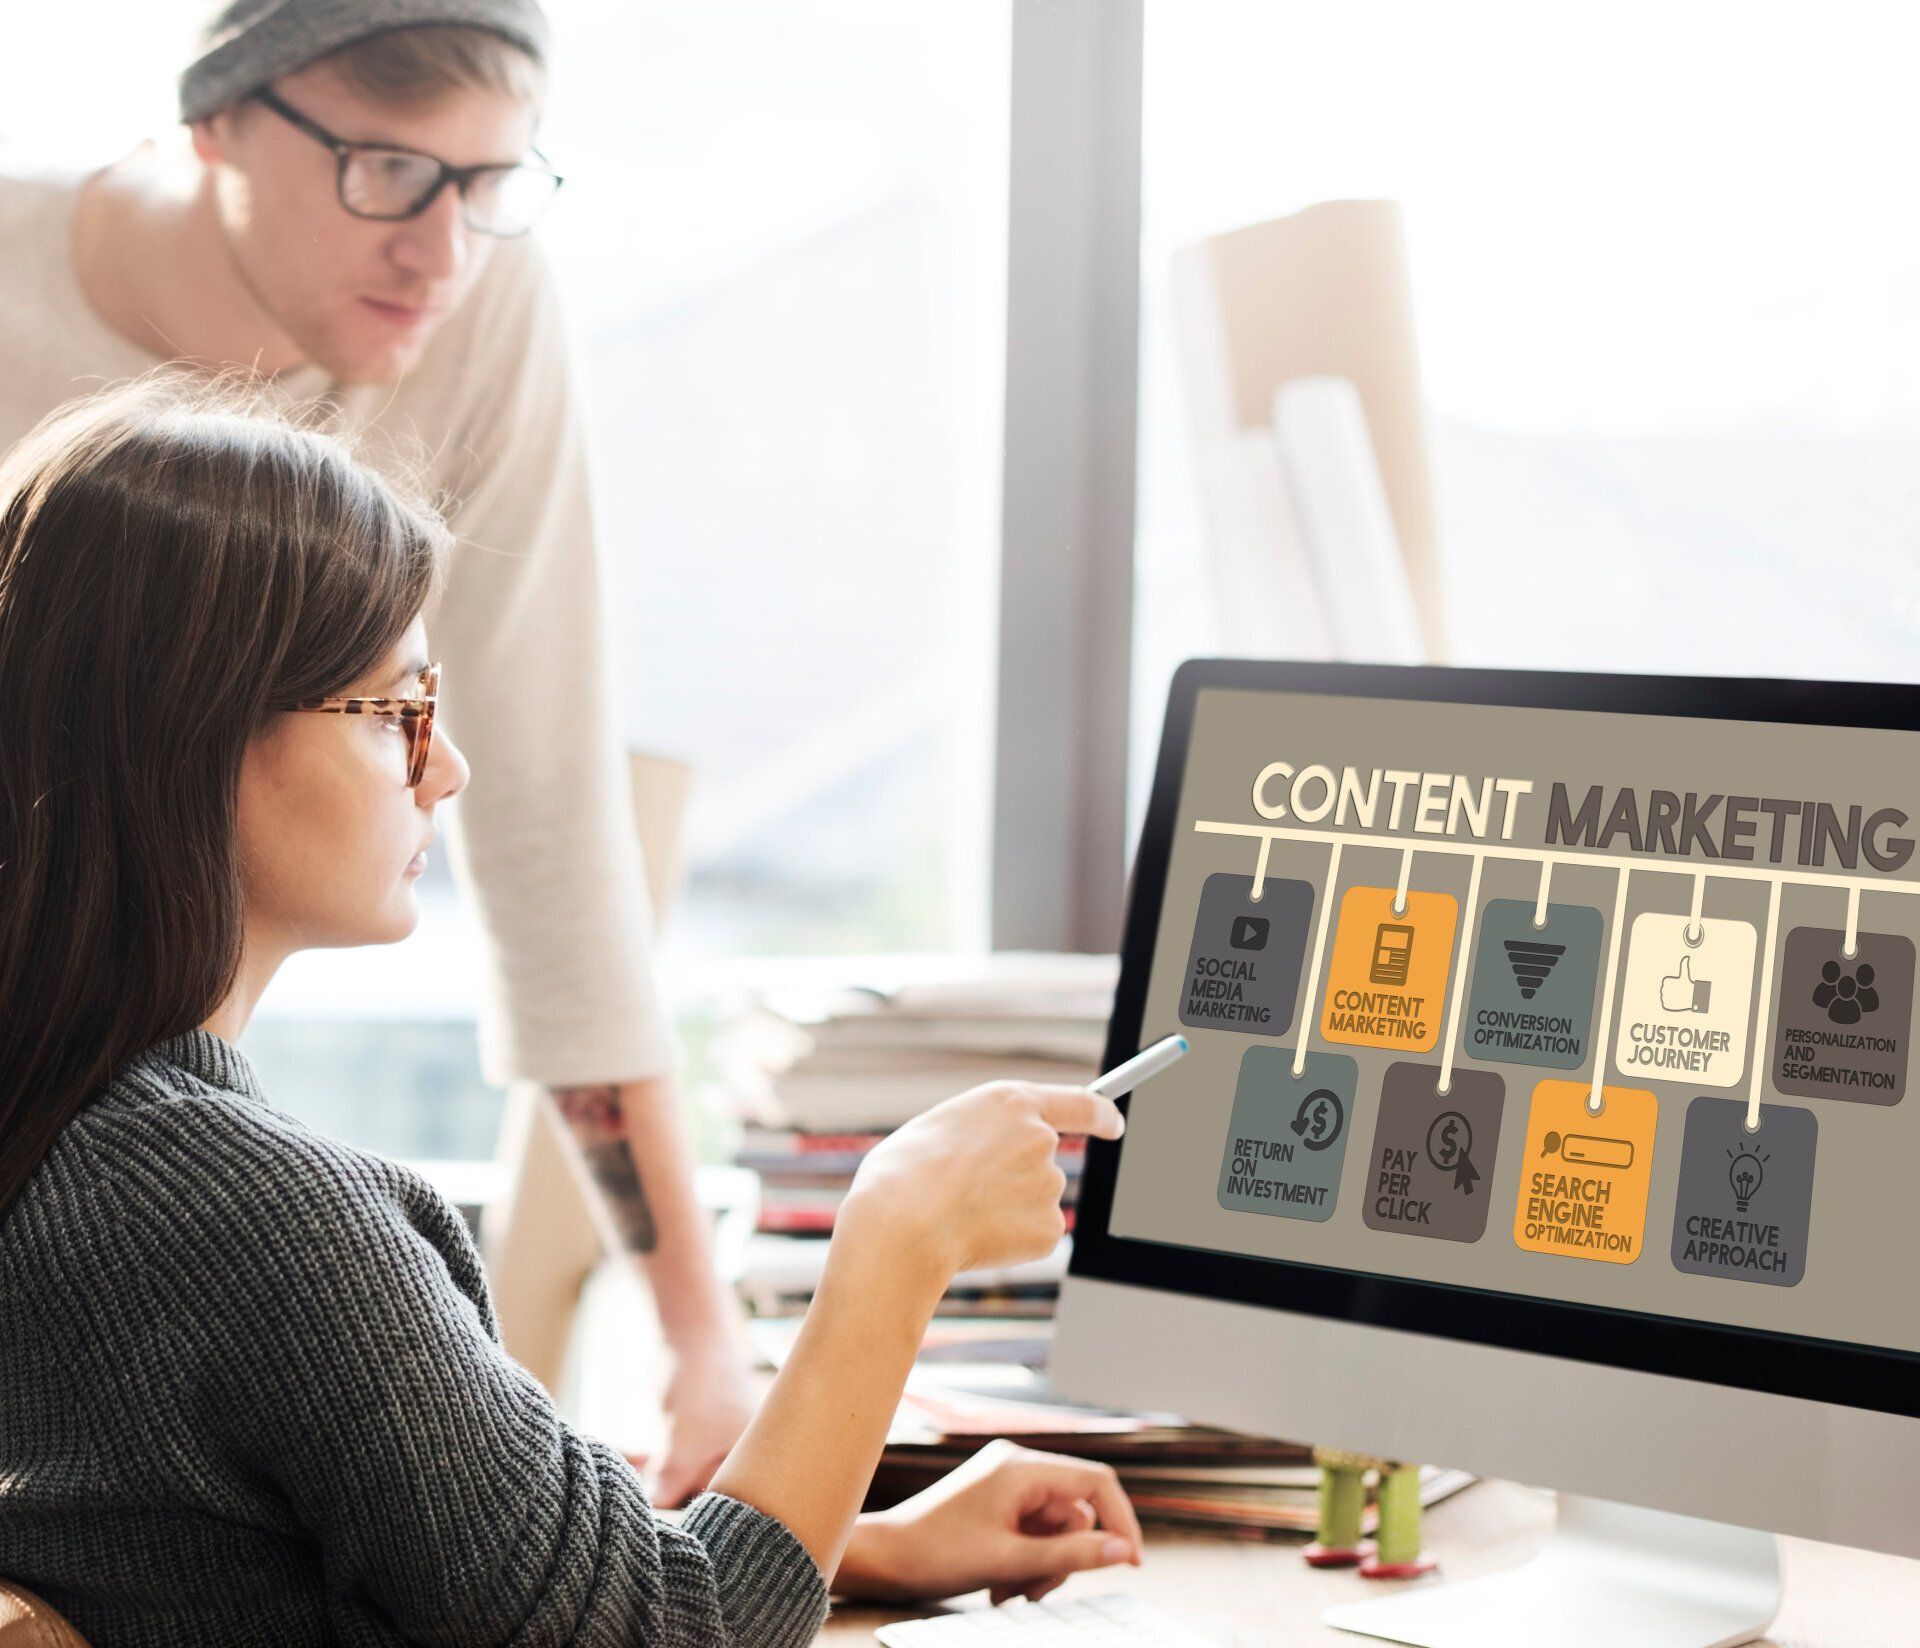 Content marketing is a long-term play, but will establish your business as an industry authority with time.